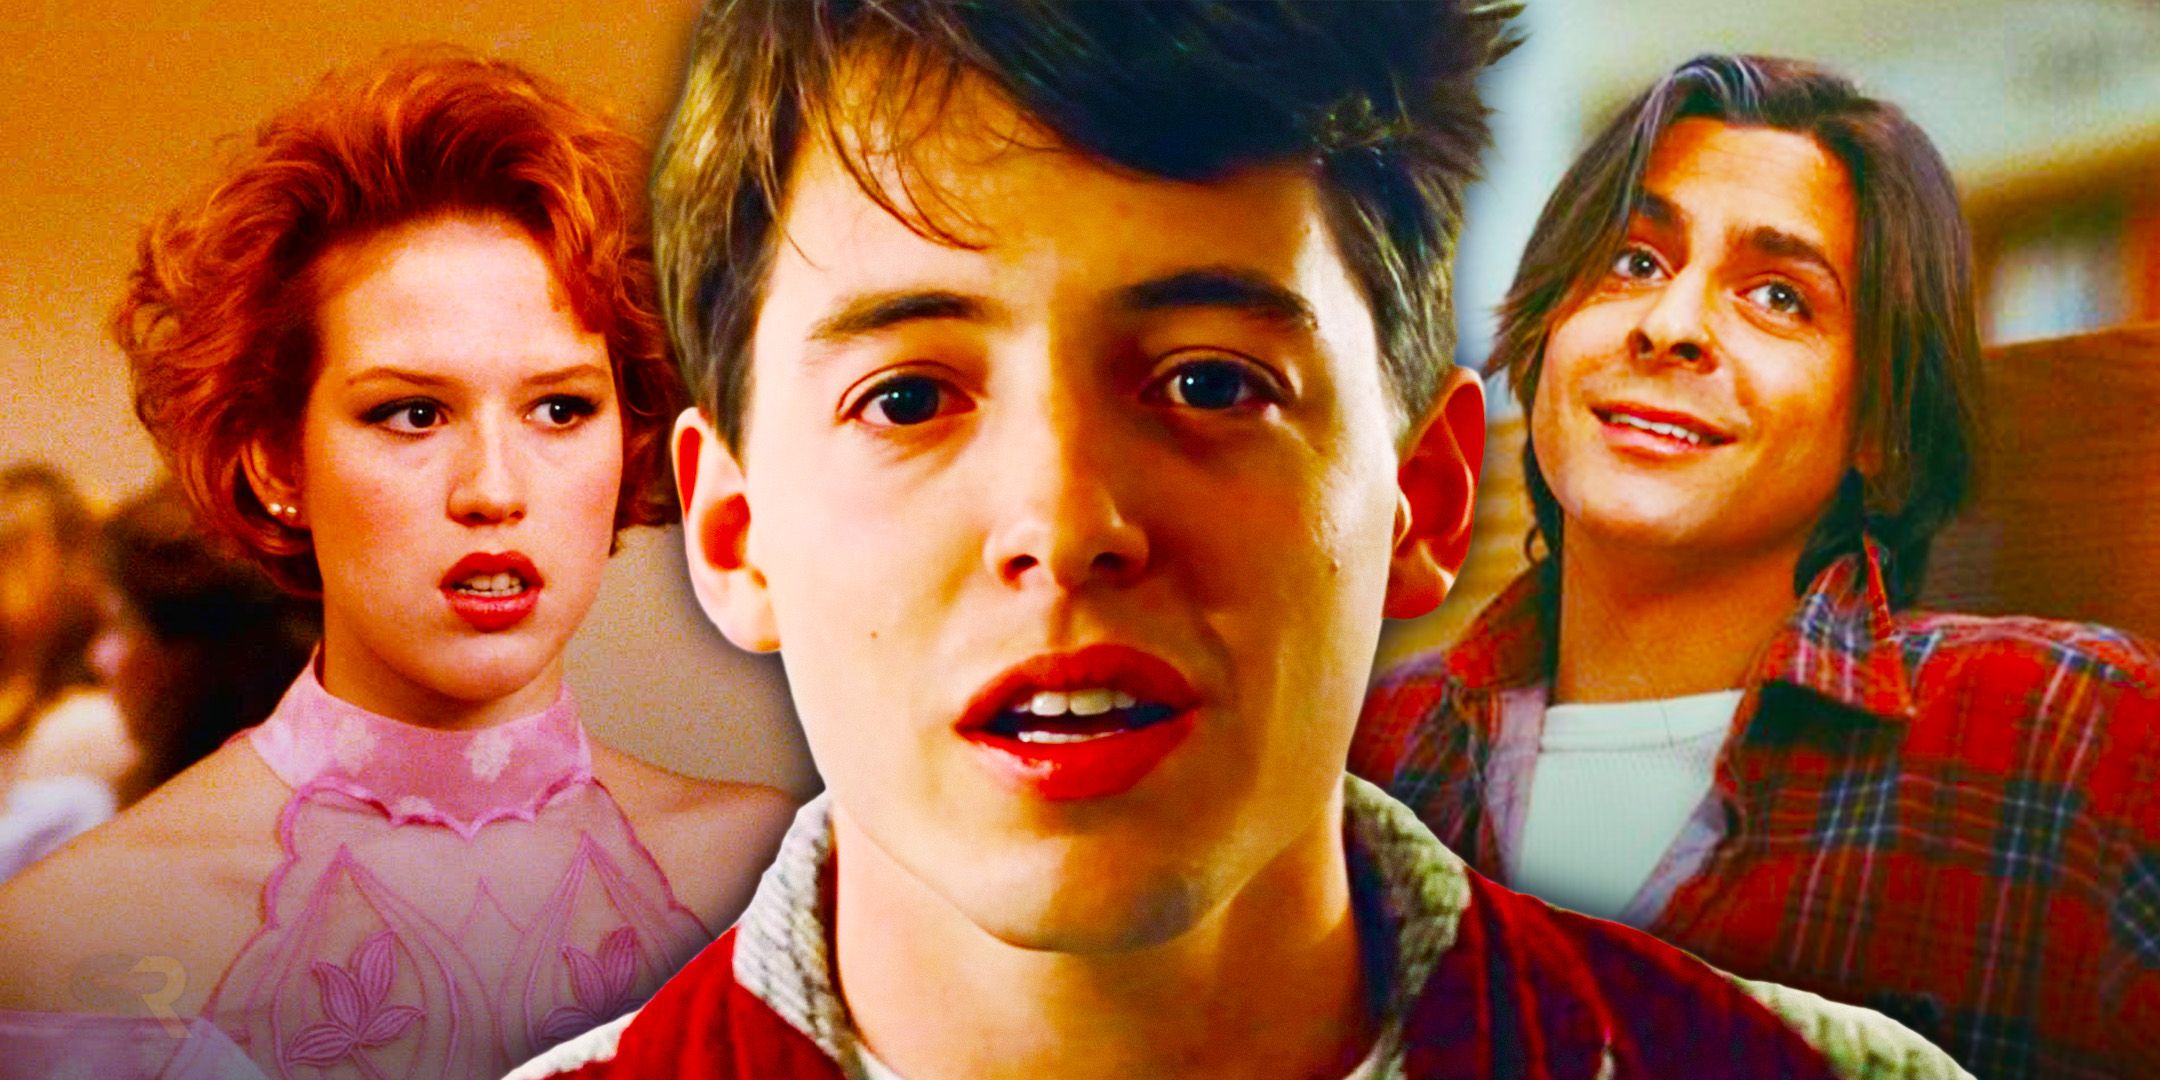 The 15 Best Quotes From John Hughes Movies Ferris Bueller's Day Off The Breakfast Club